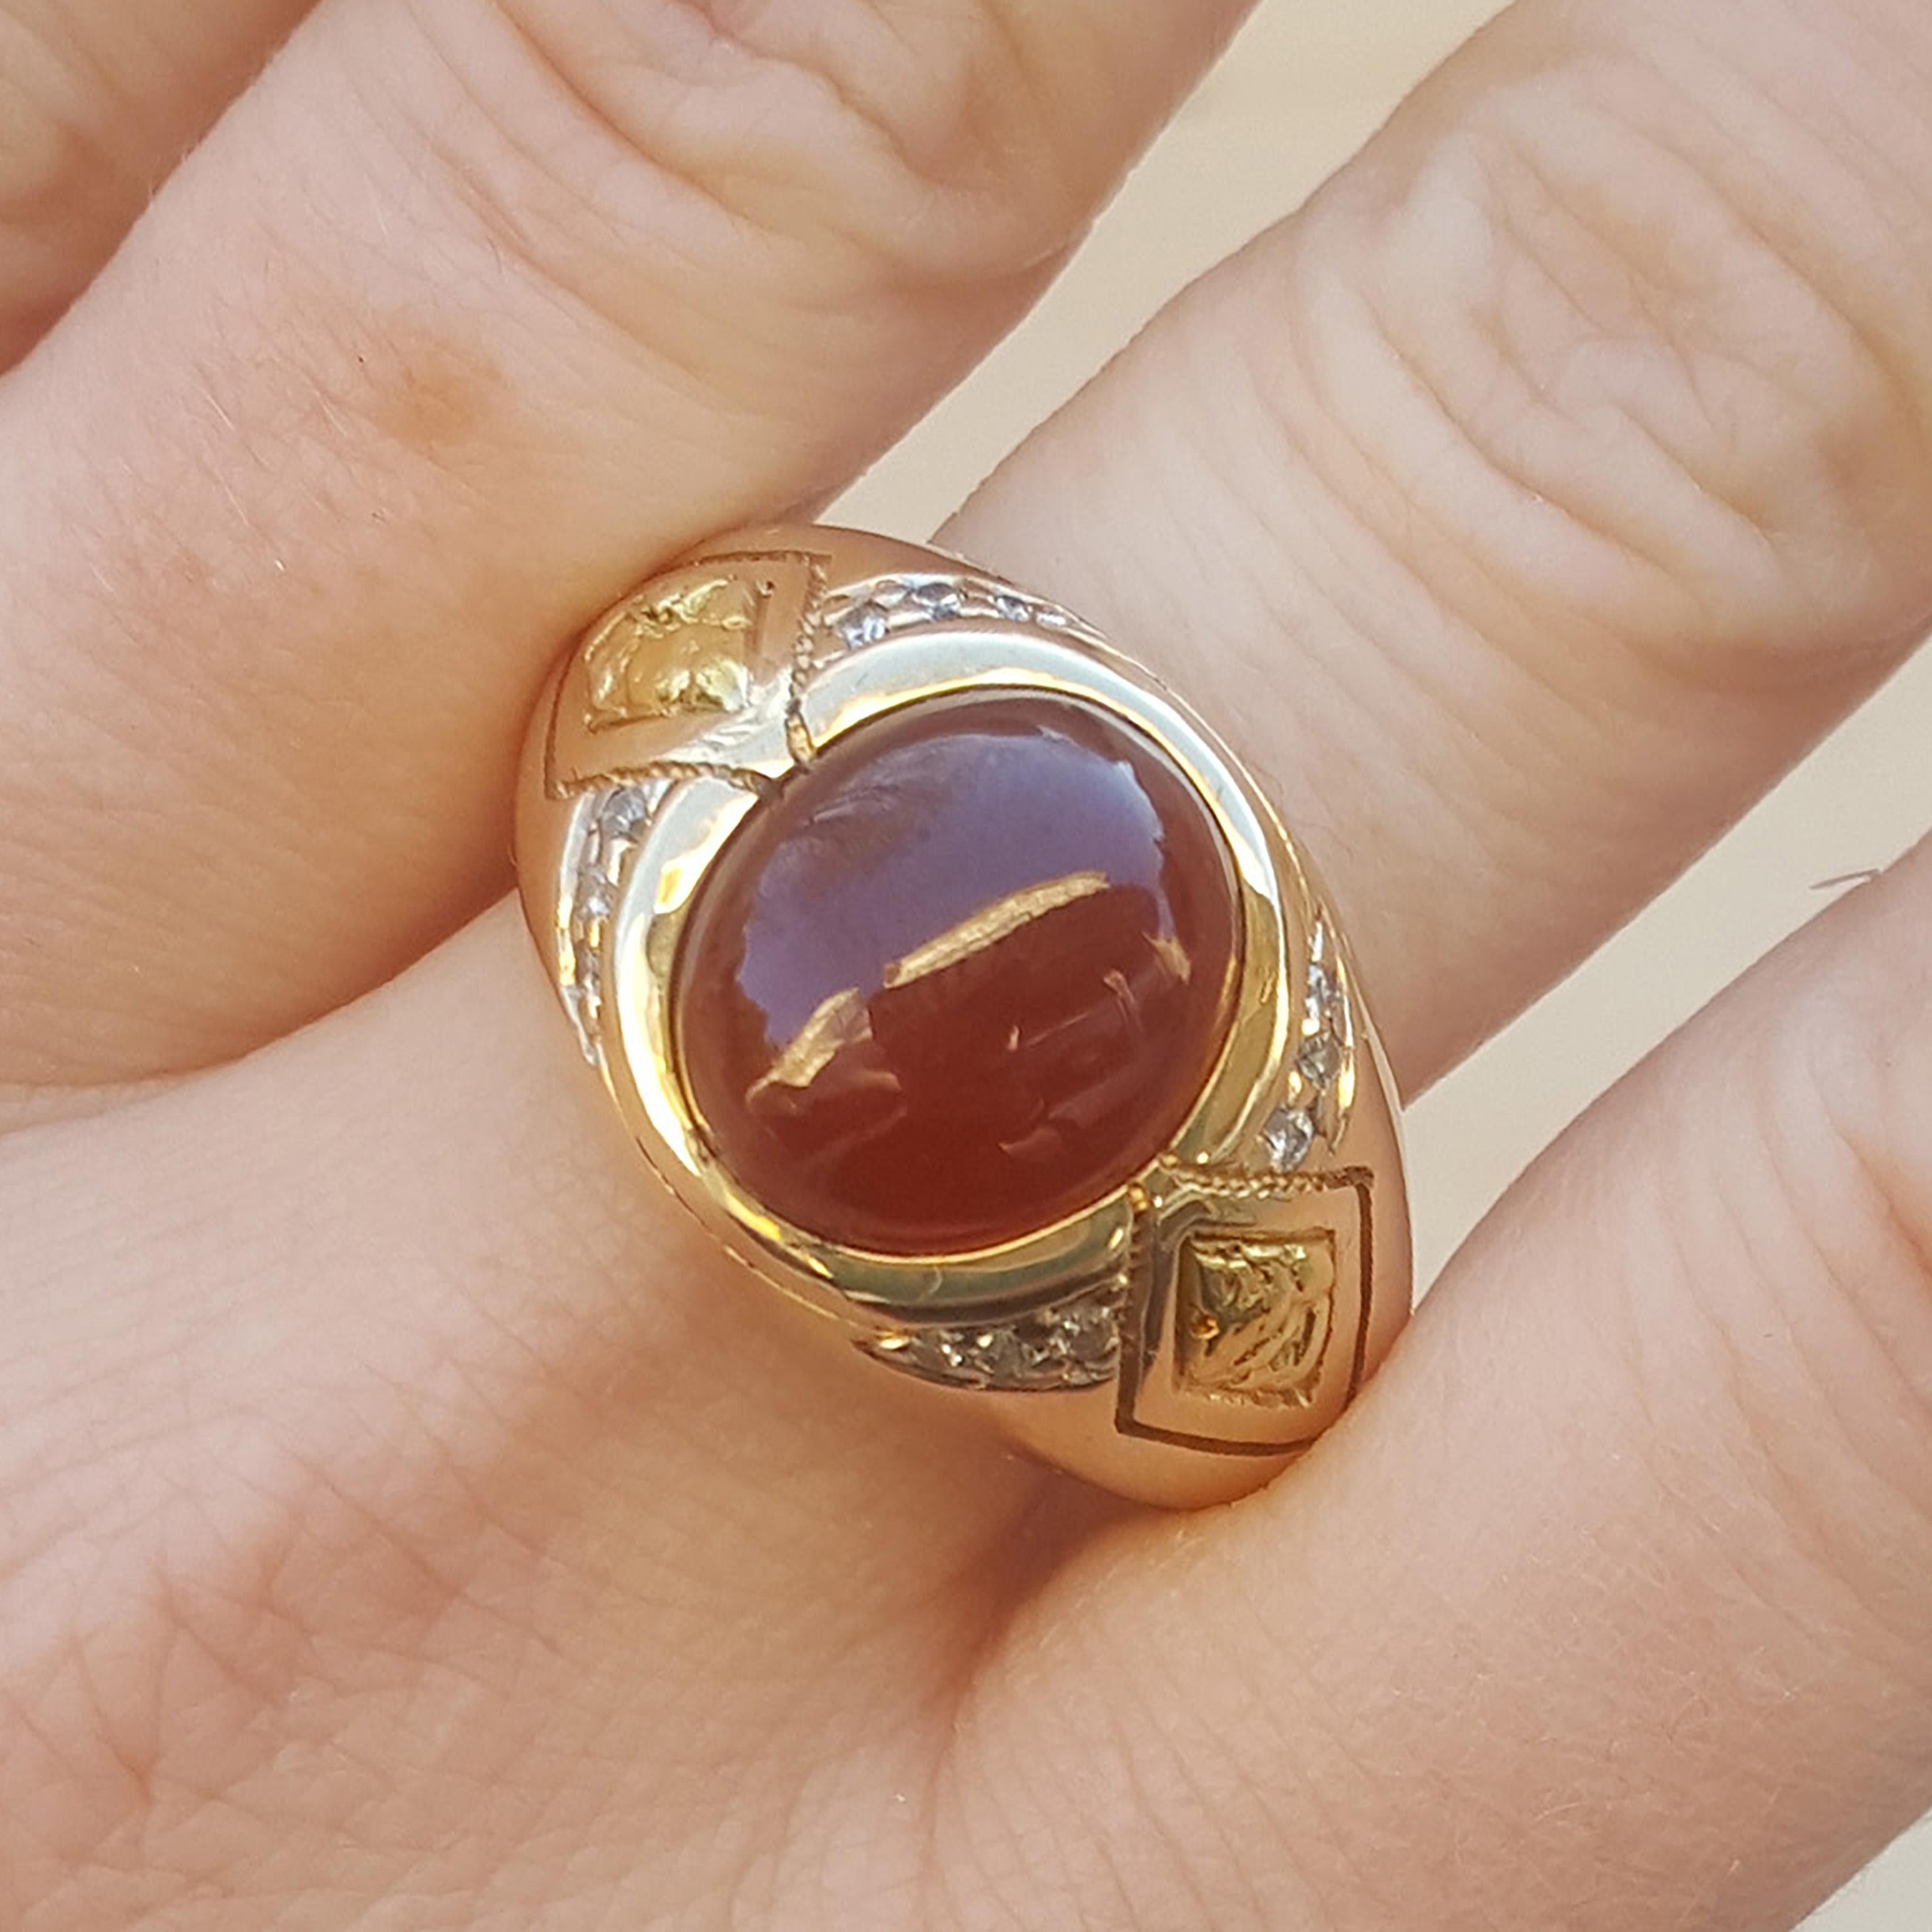 This rare type of spessartite garnet, in a deep shade of spicy orangey-red, is the perfect centerpiece for this classic men’s 14kt ring. The smoothly polished 9.25ct cab contrasts nicely with the texture added by 0.17ct of fine diamonds and